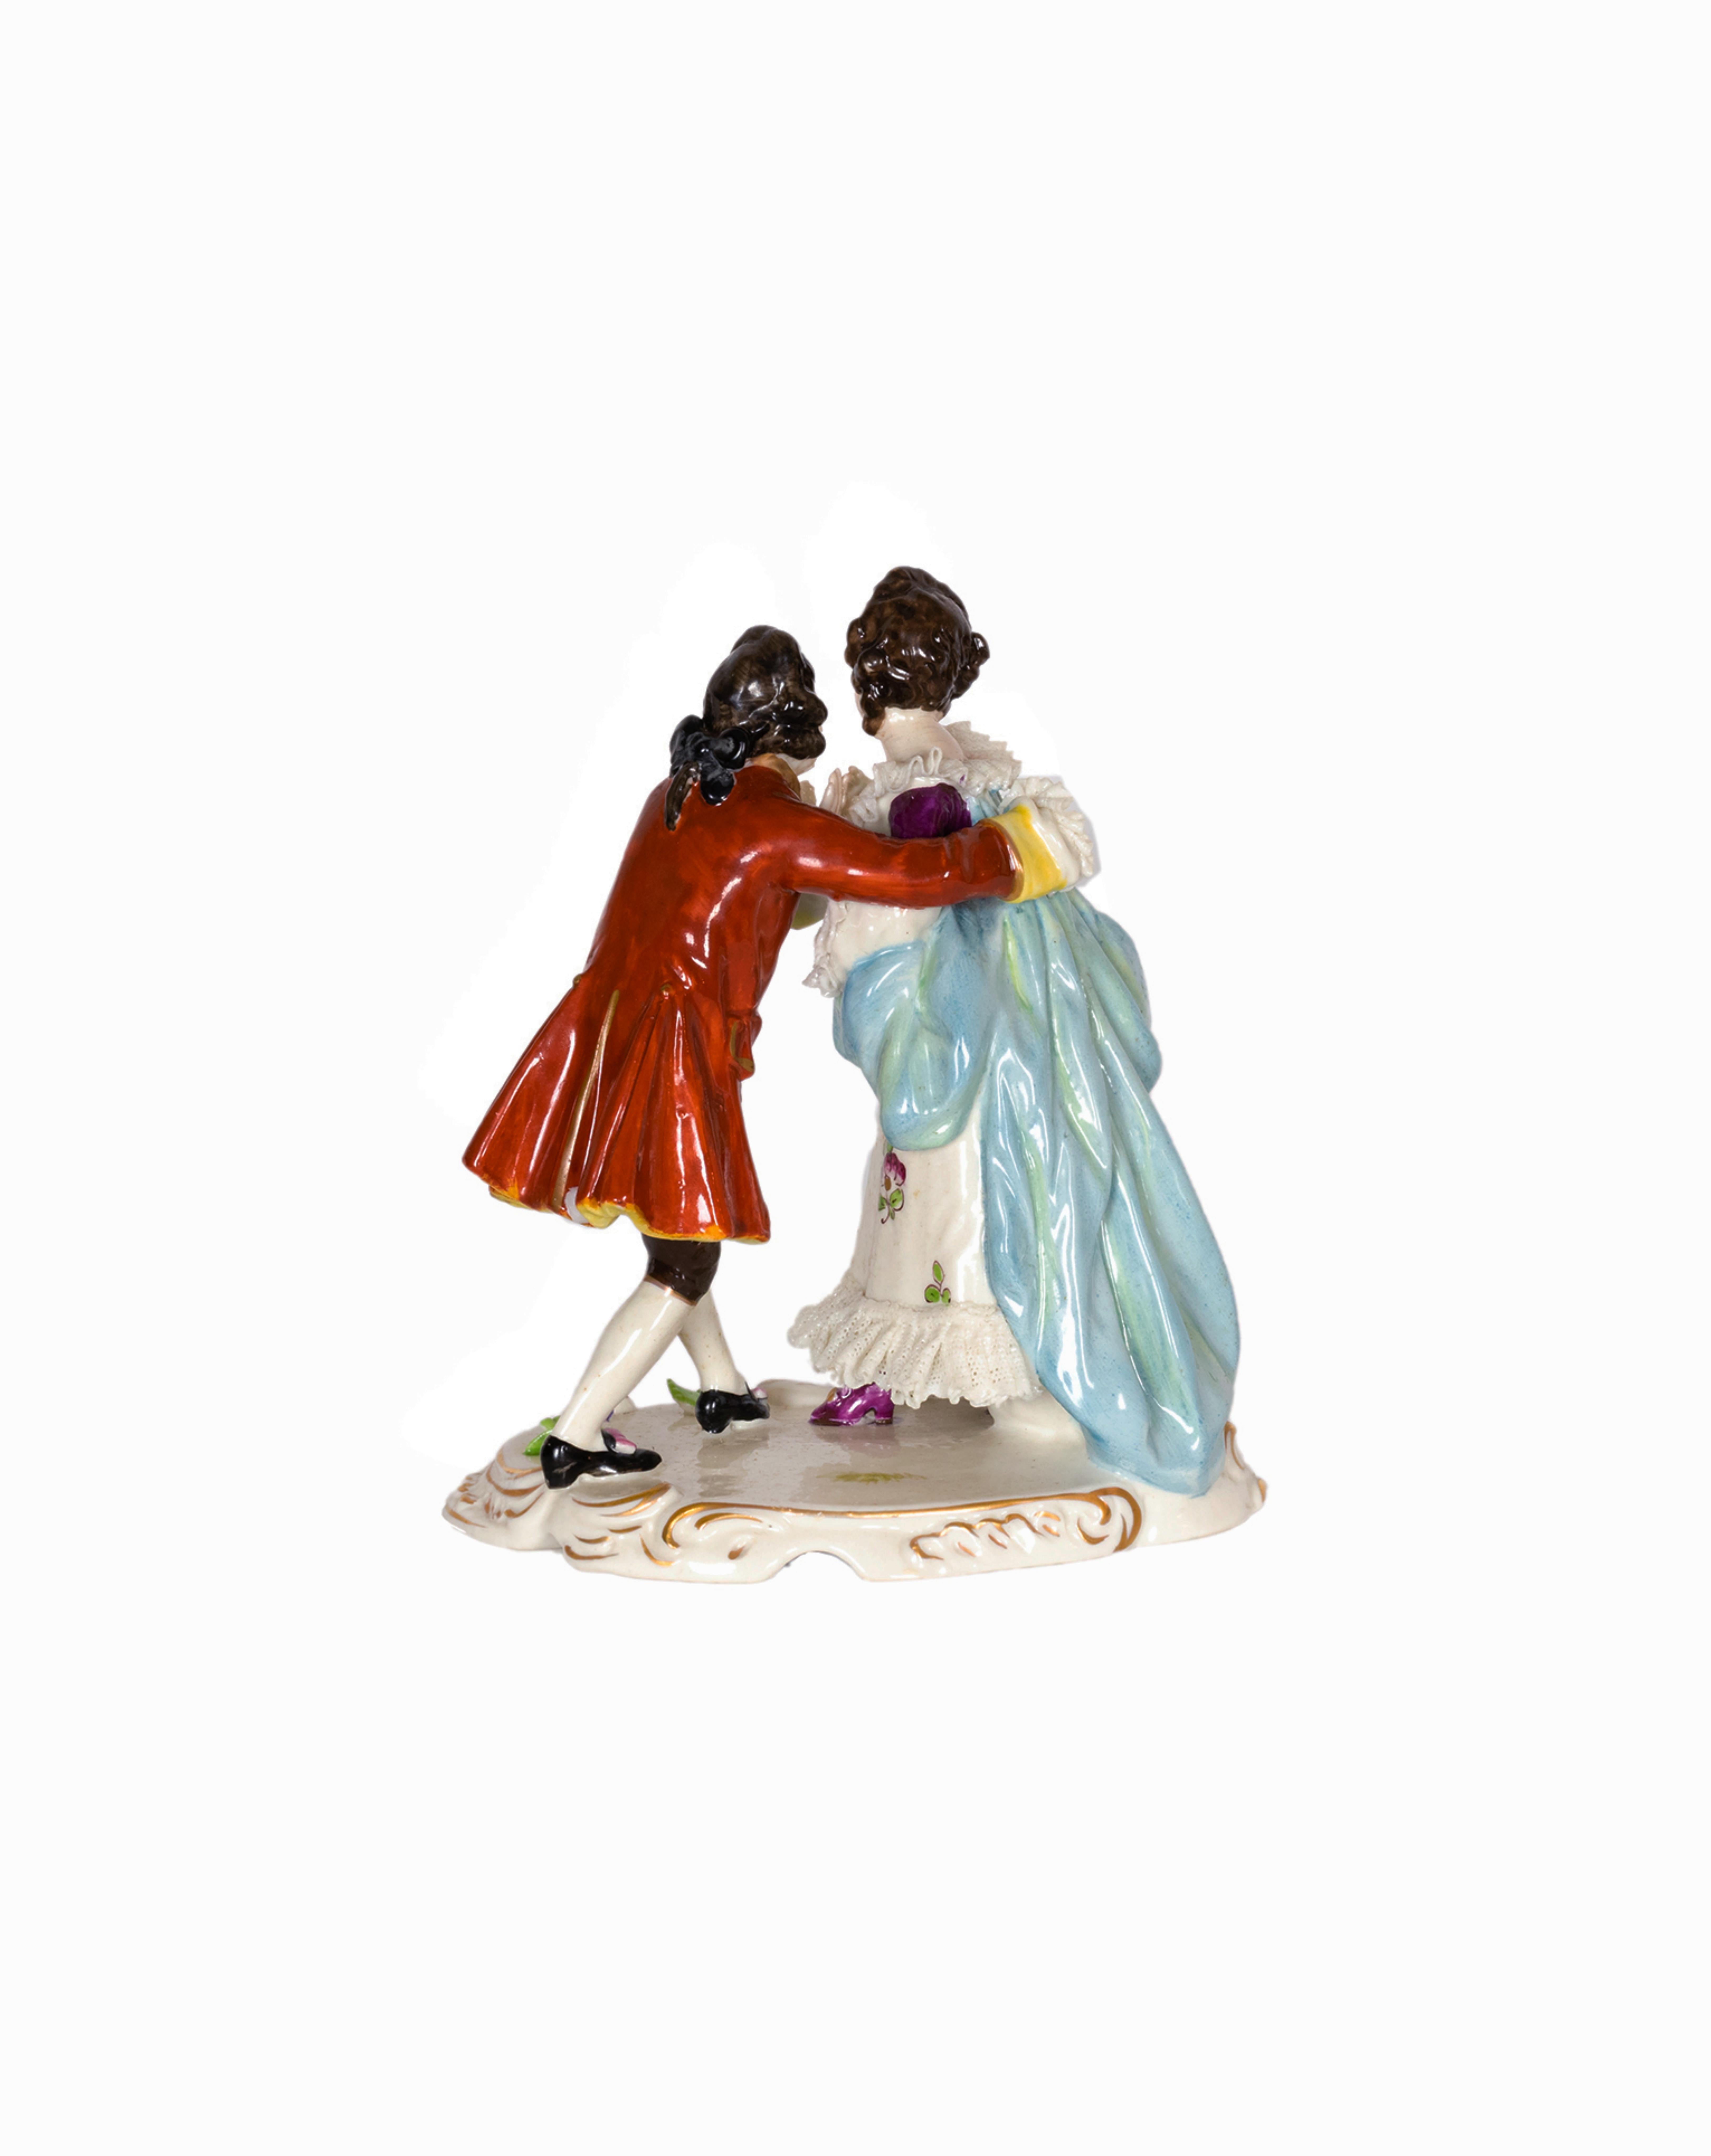 German Porcelain Figurine Of Loving Couple, Volkstedt, 19th Century  For Sale 3